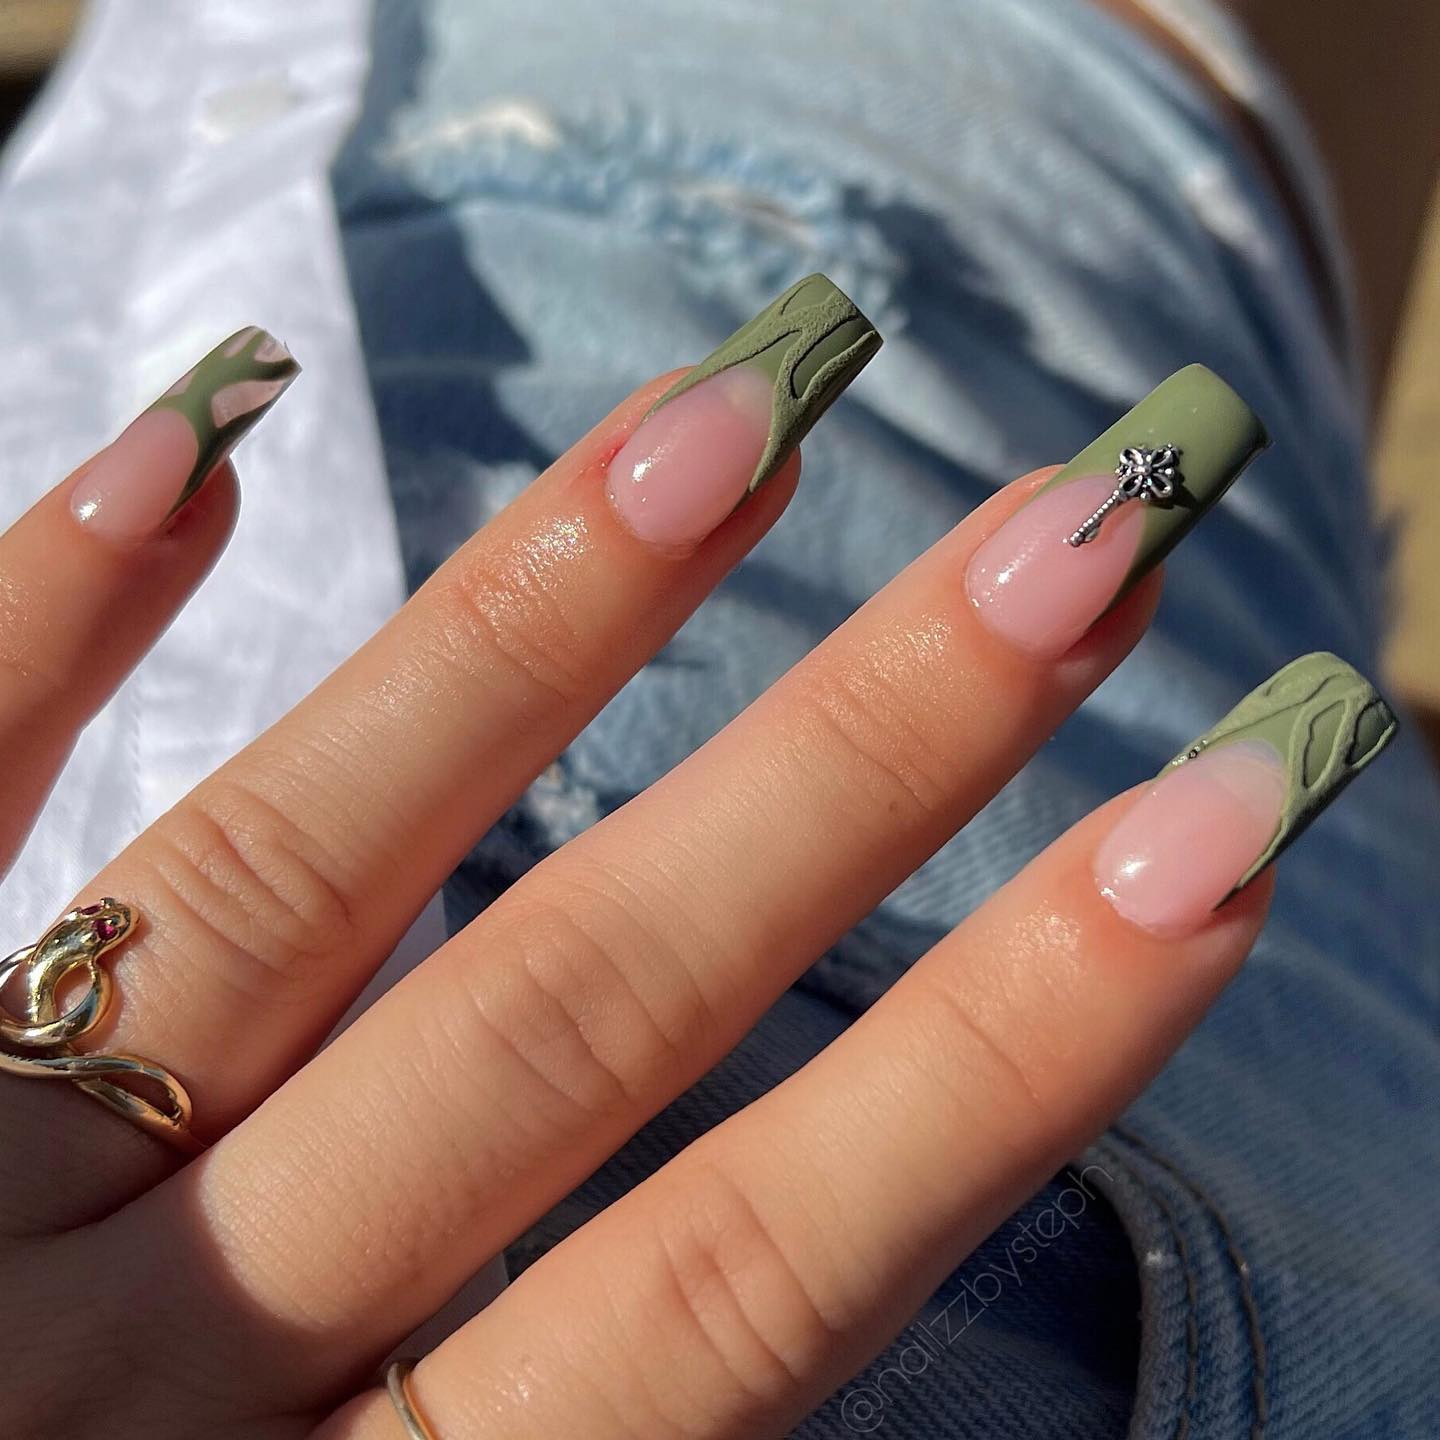 Olive Green French Tip Nails with decoration in form of small silver key